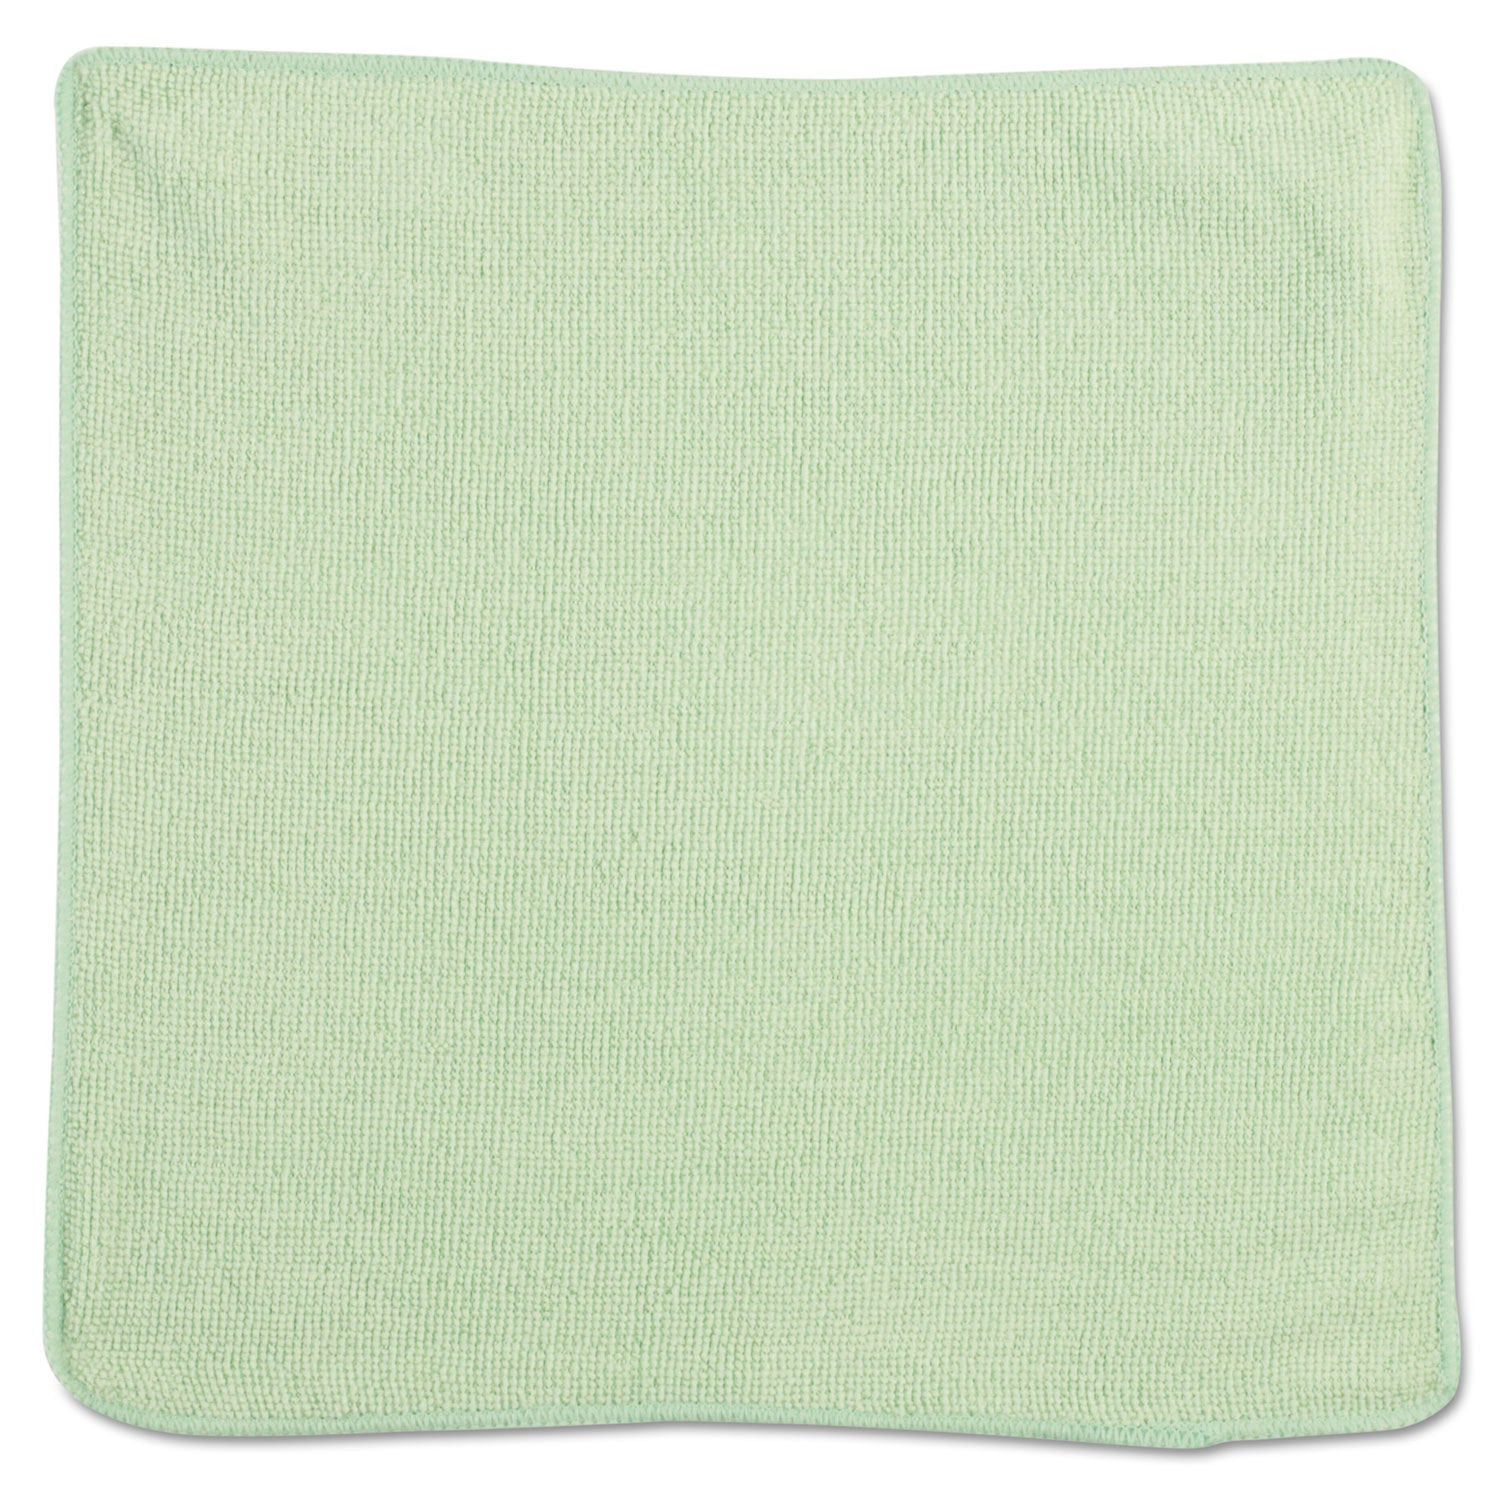 Microfiber Cleaning Cloths, 12 x 12, Green, 24/Pack - 